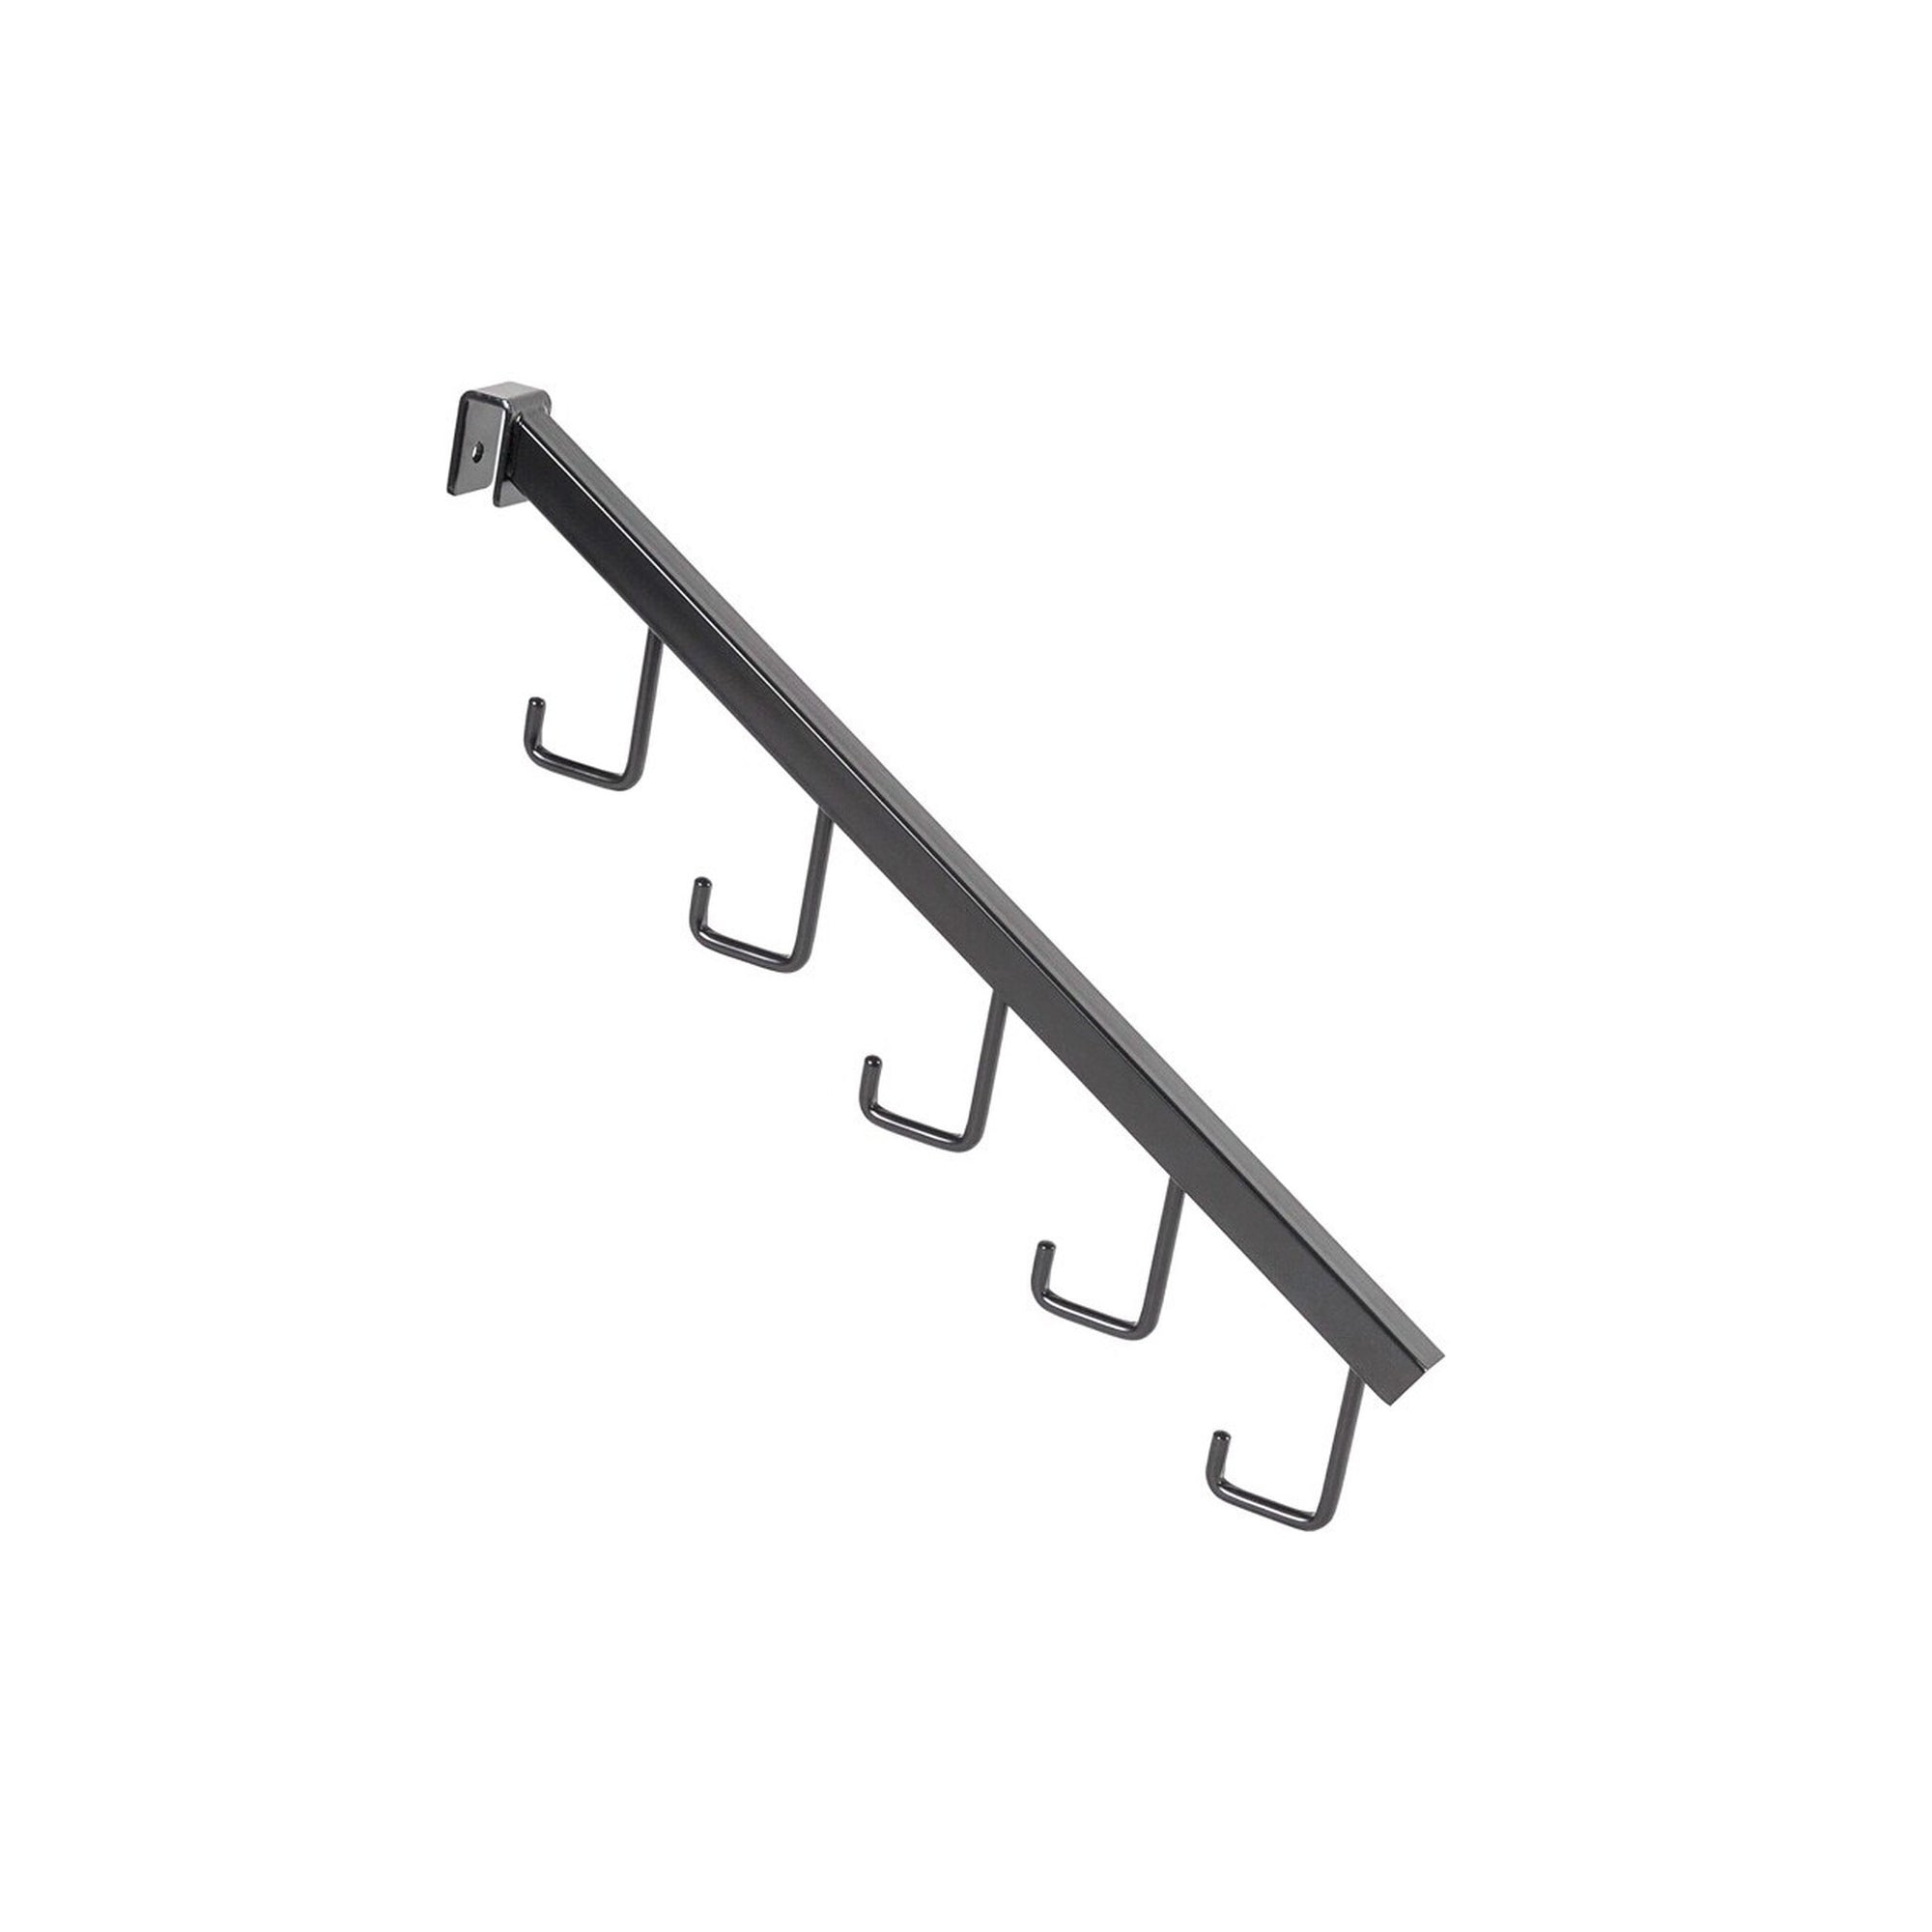 MAXe Backrail Angled Arm with 5 Hooks - L405